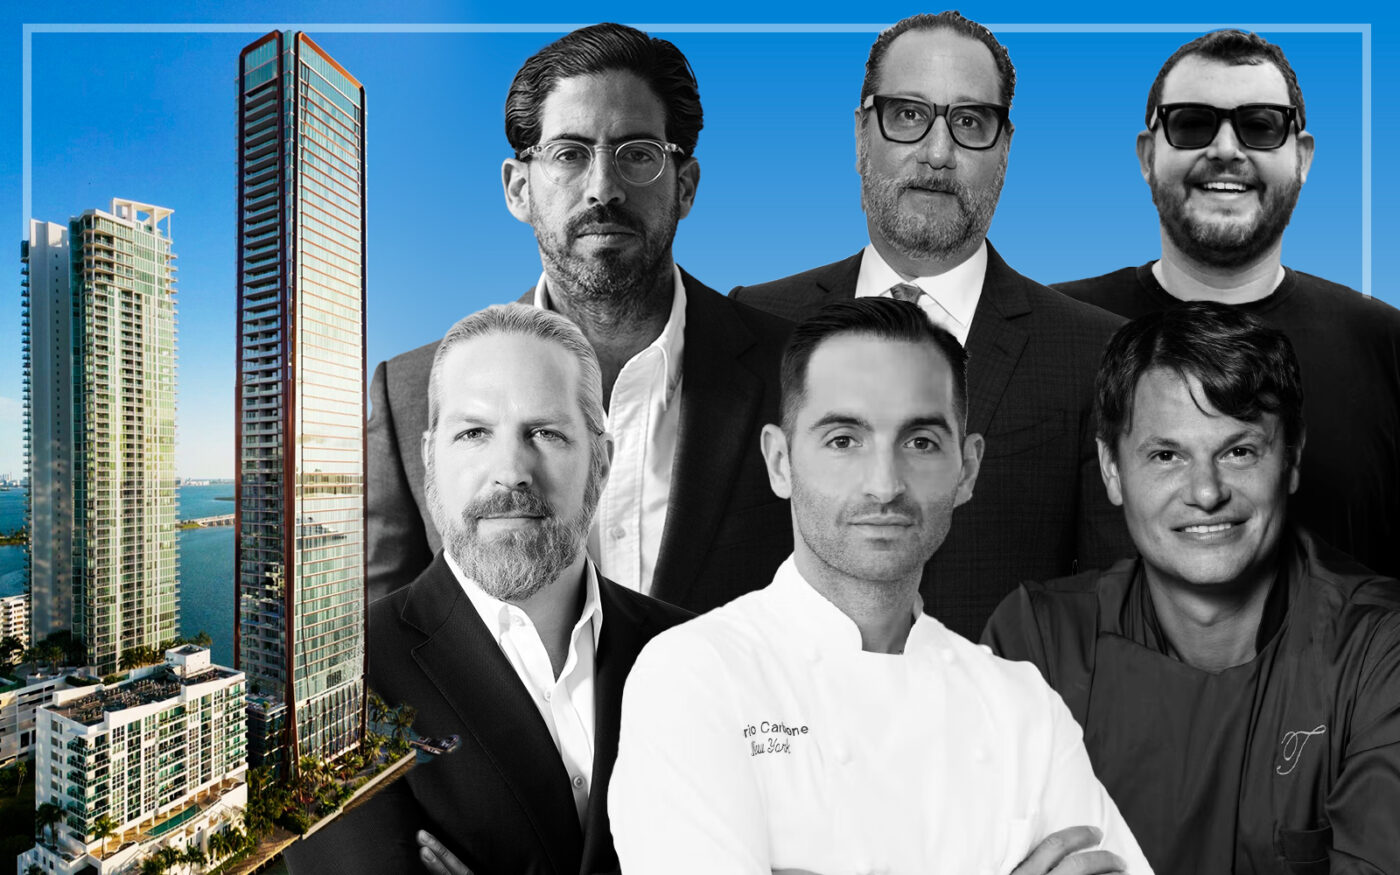 Terra's David Martin, One Thousand Group's Louis Birdman and Major Food Group's Jeff Zalaznick, One Thousand Group's Kevin Venger, Major Food Group's Mario Carbone and Rich Torrisi with a rendering of The Villa project at 710 Northeast 29th Street in Edgewater